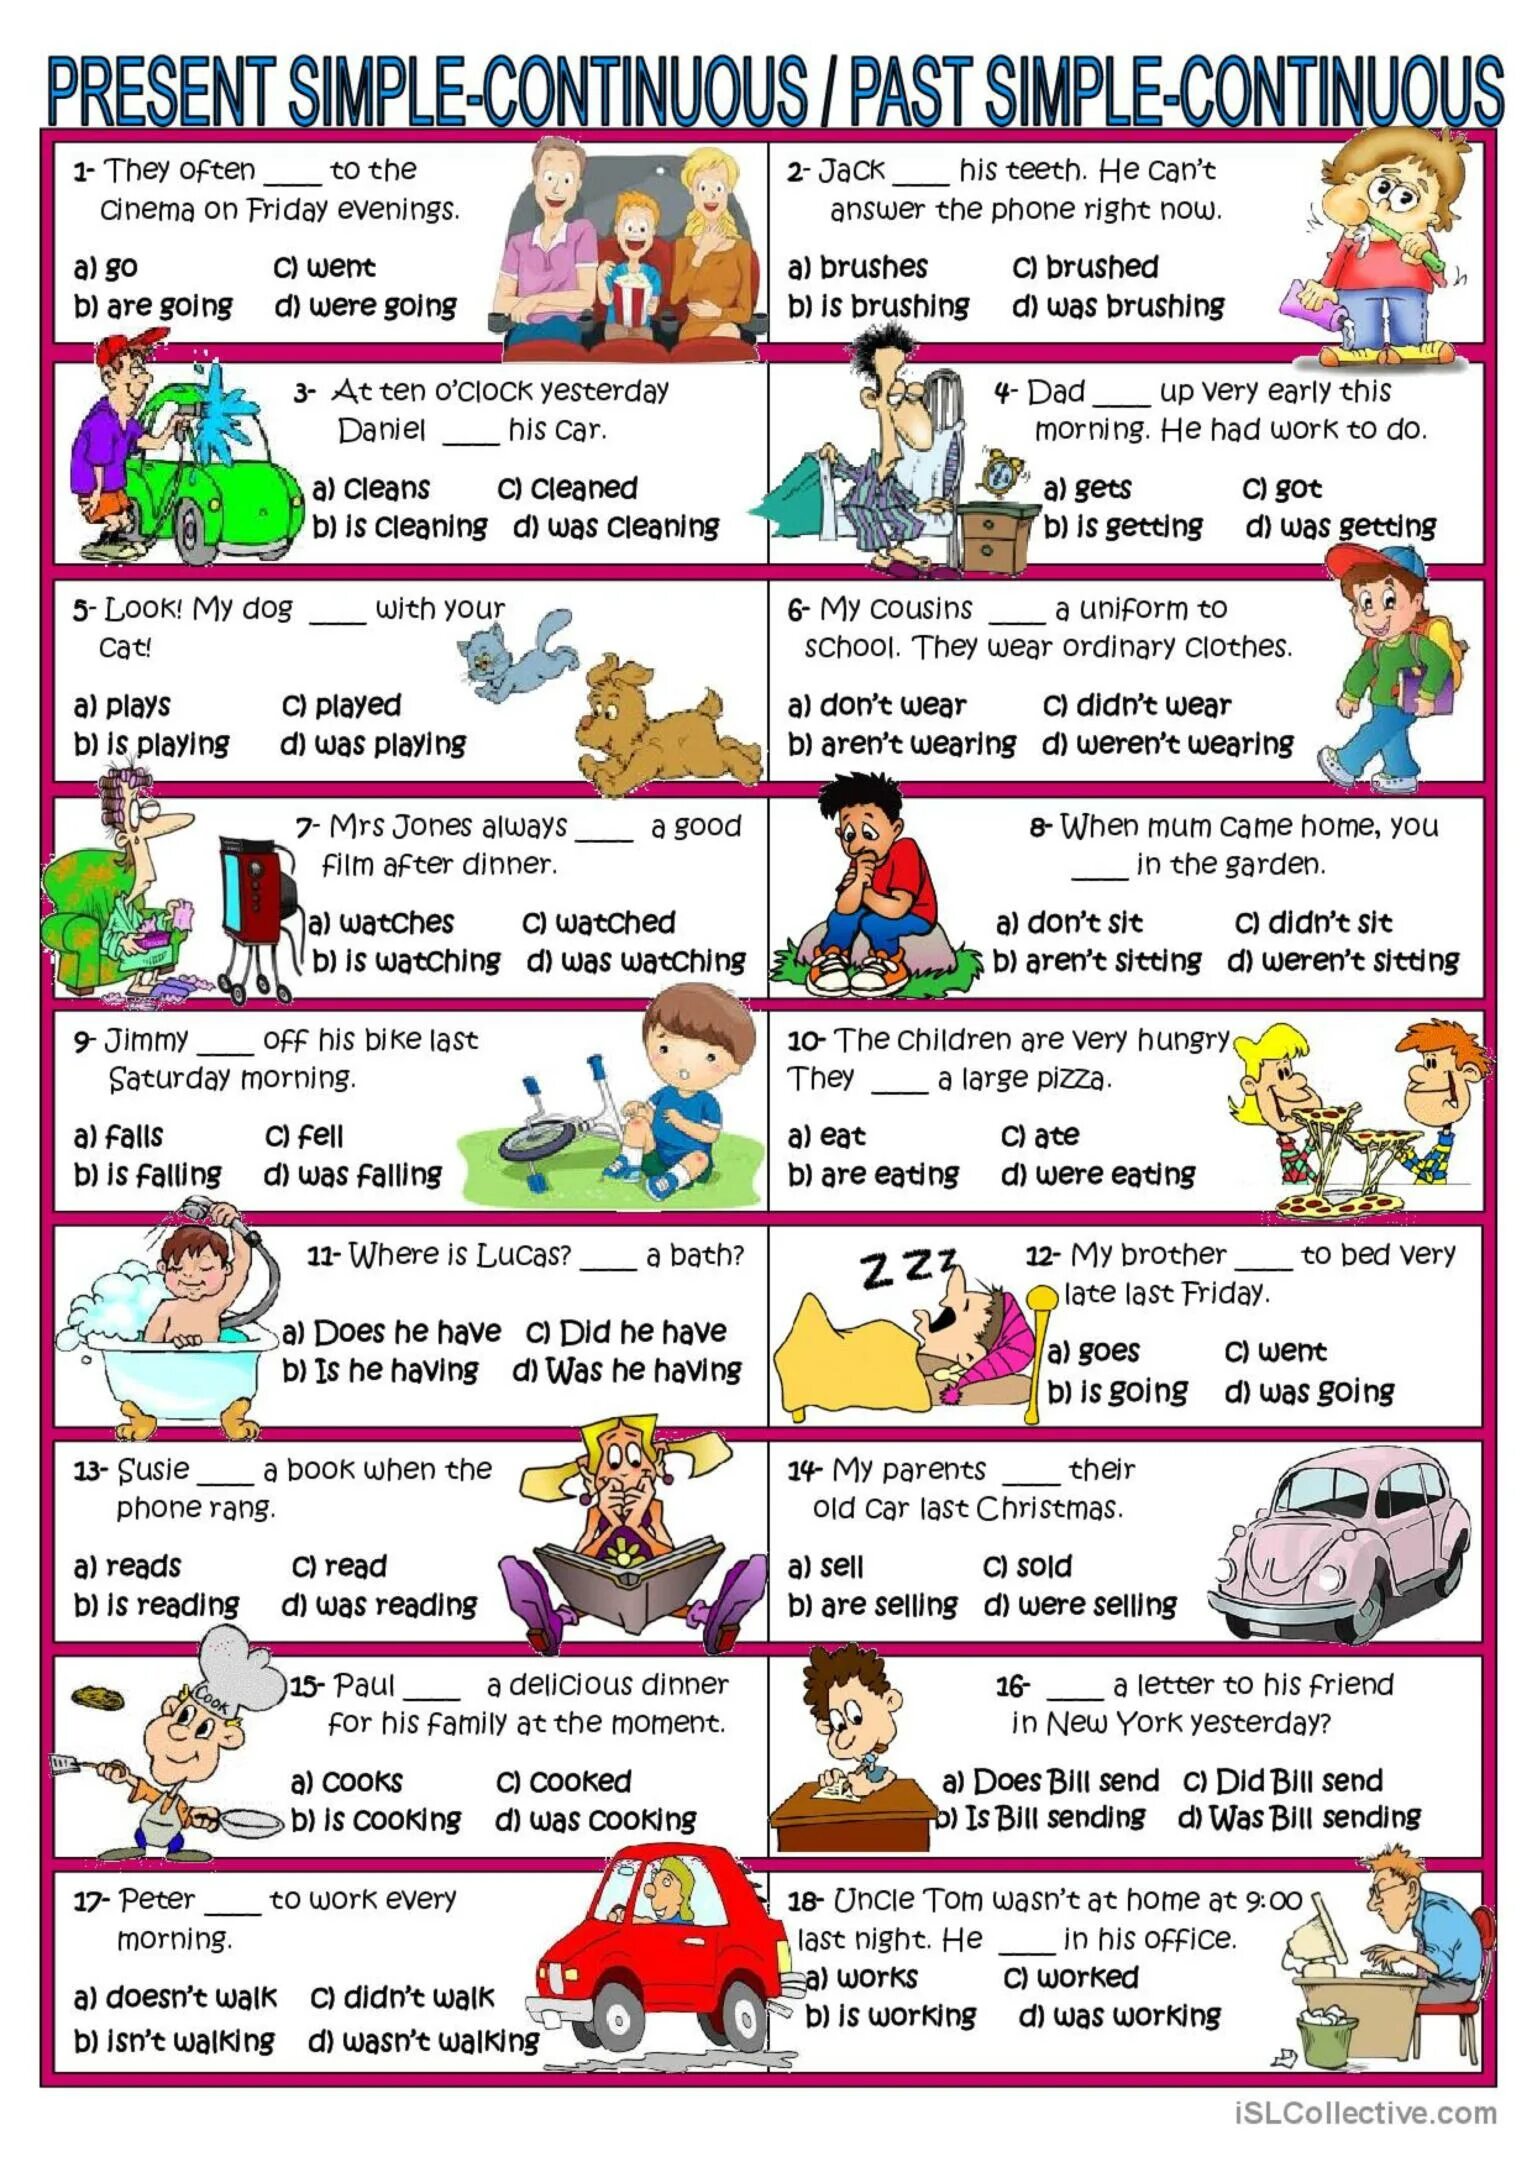 Английский язык present simple past simple Worksheets. English Worksheets present simple present Continuous past simple. Tenses present simple present Continuous past simple past Continuous Worksheets. Present simple present Continuous past simple Worksheets упражнения. What your friends do yesterday